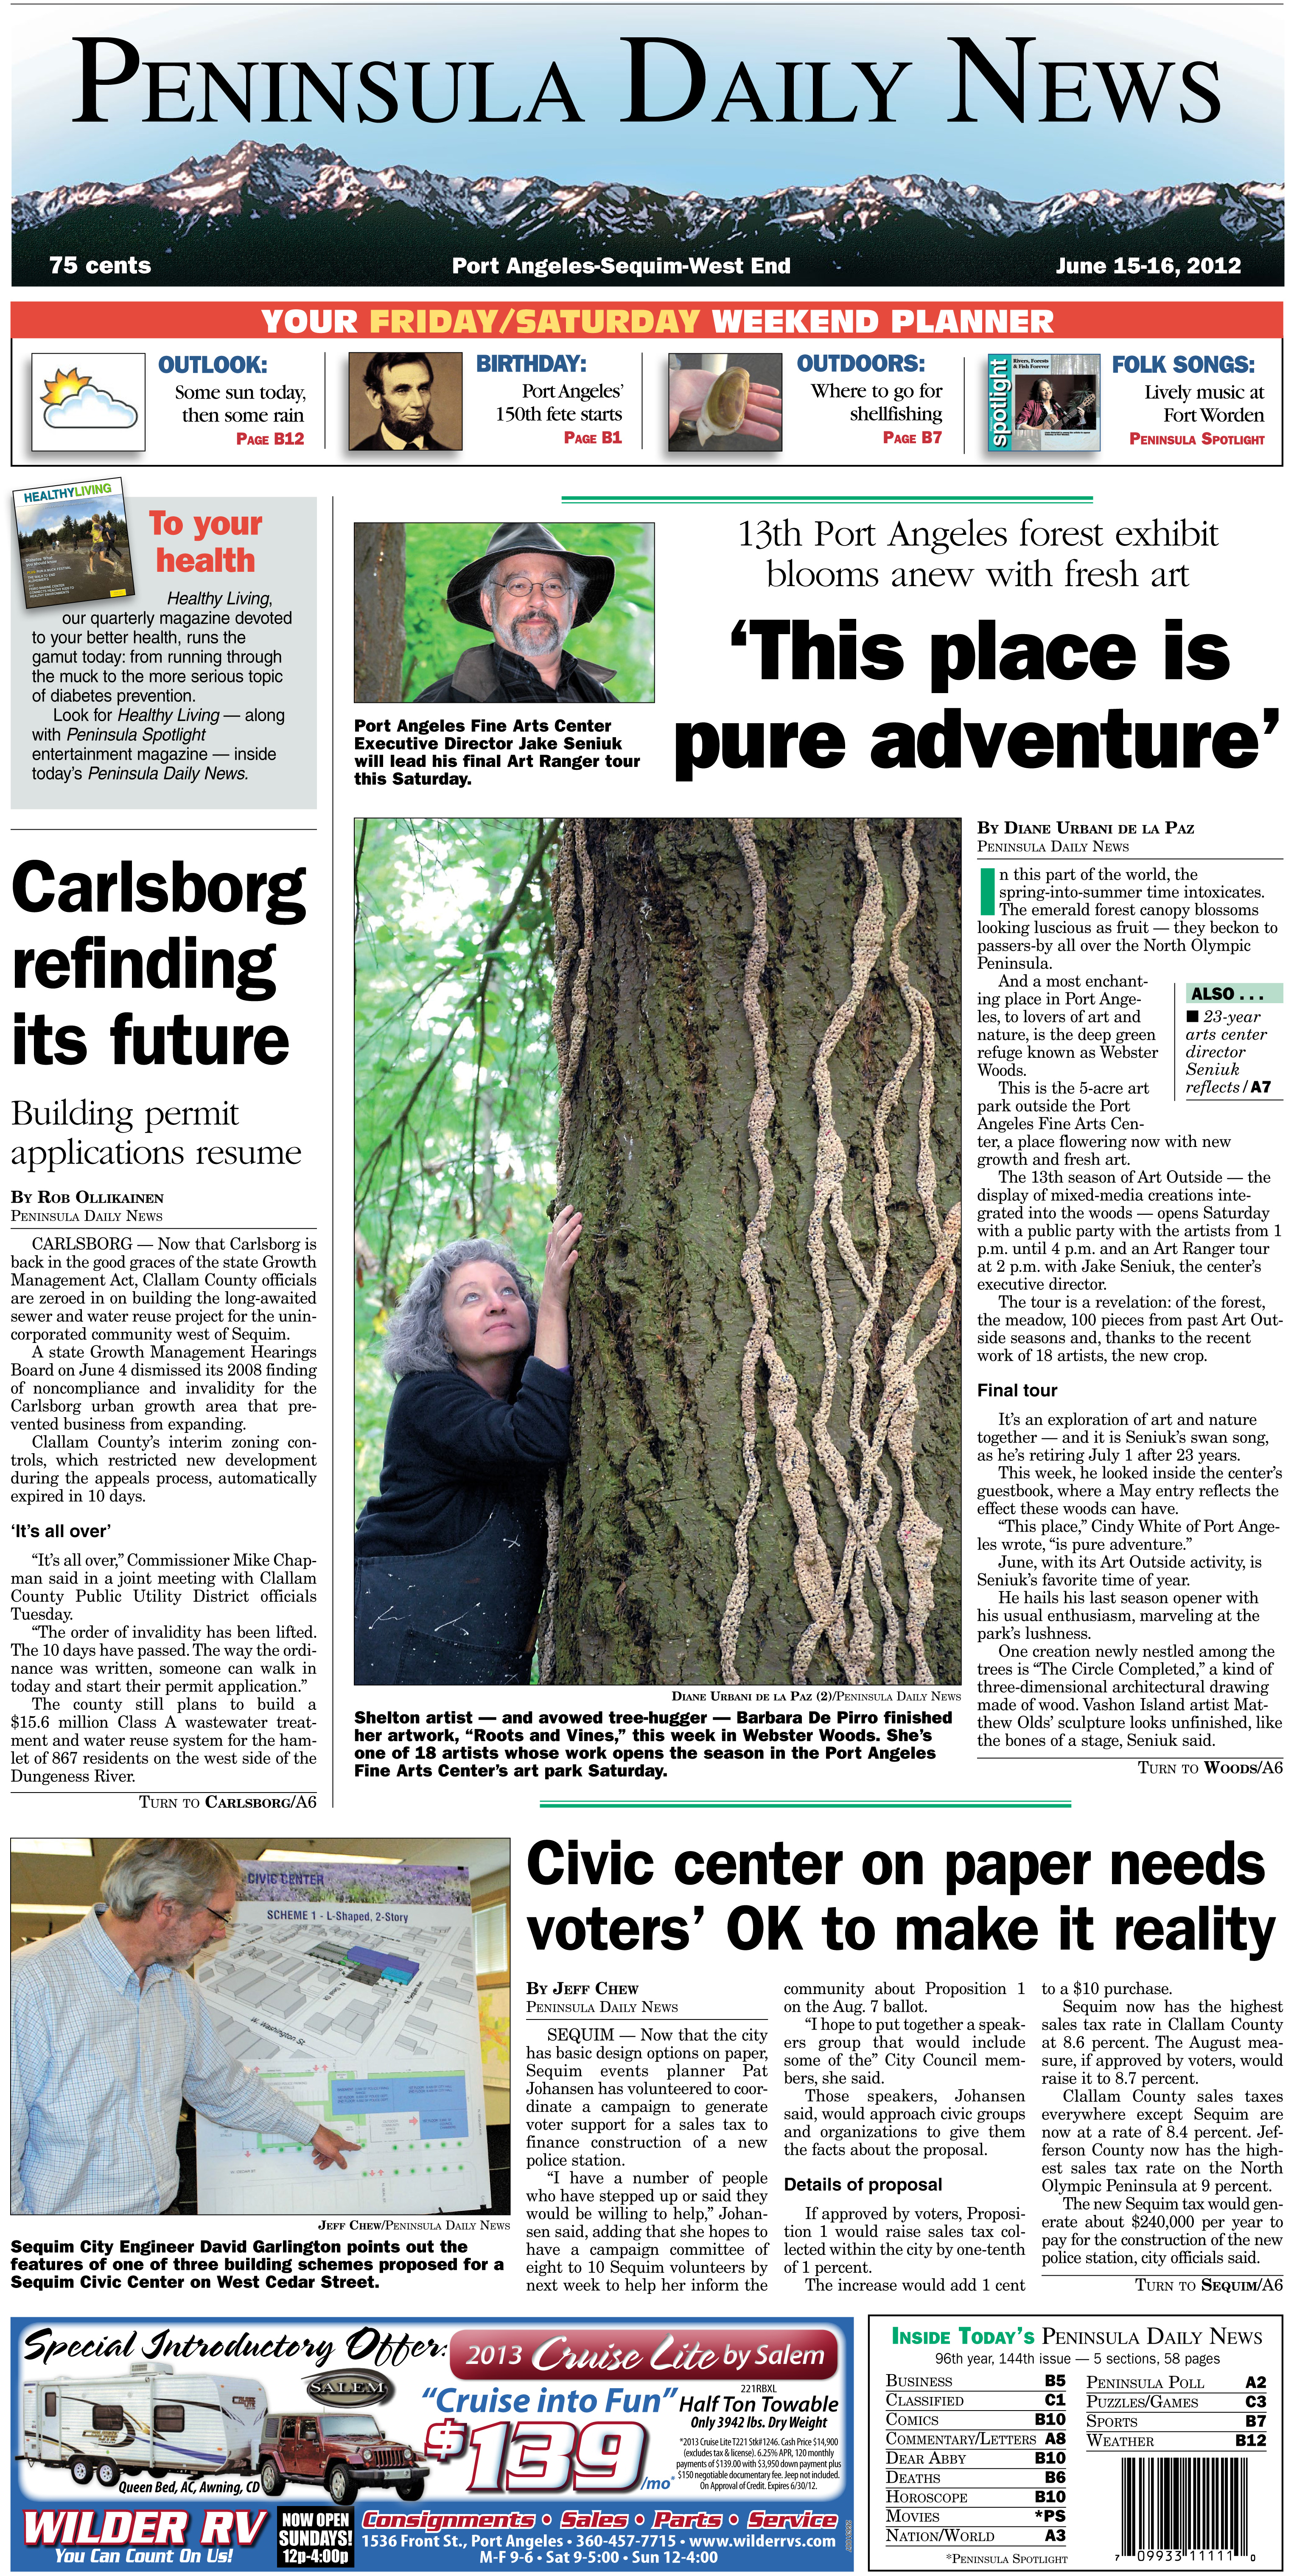 PDN has two daily editions — one for residents of Jefferson County